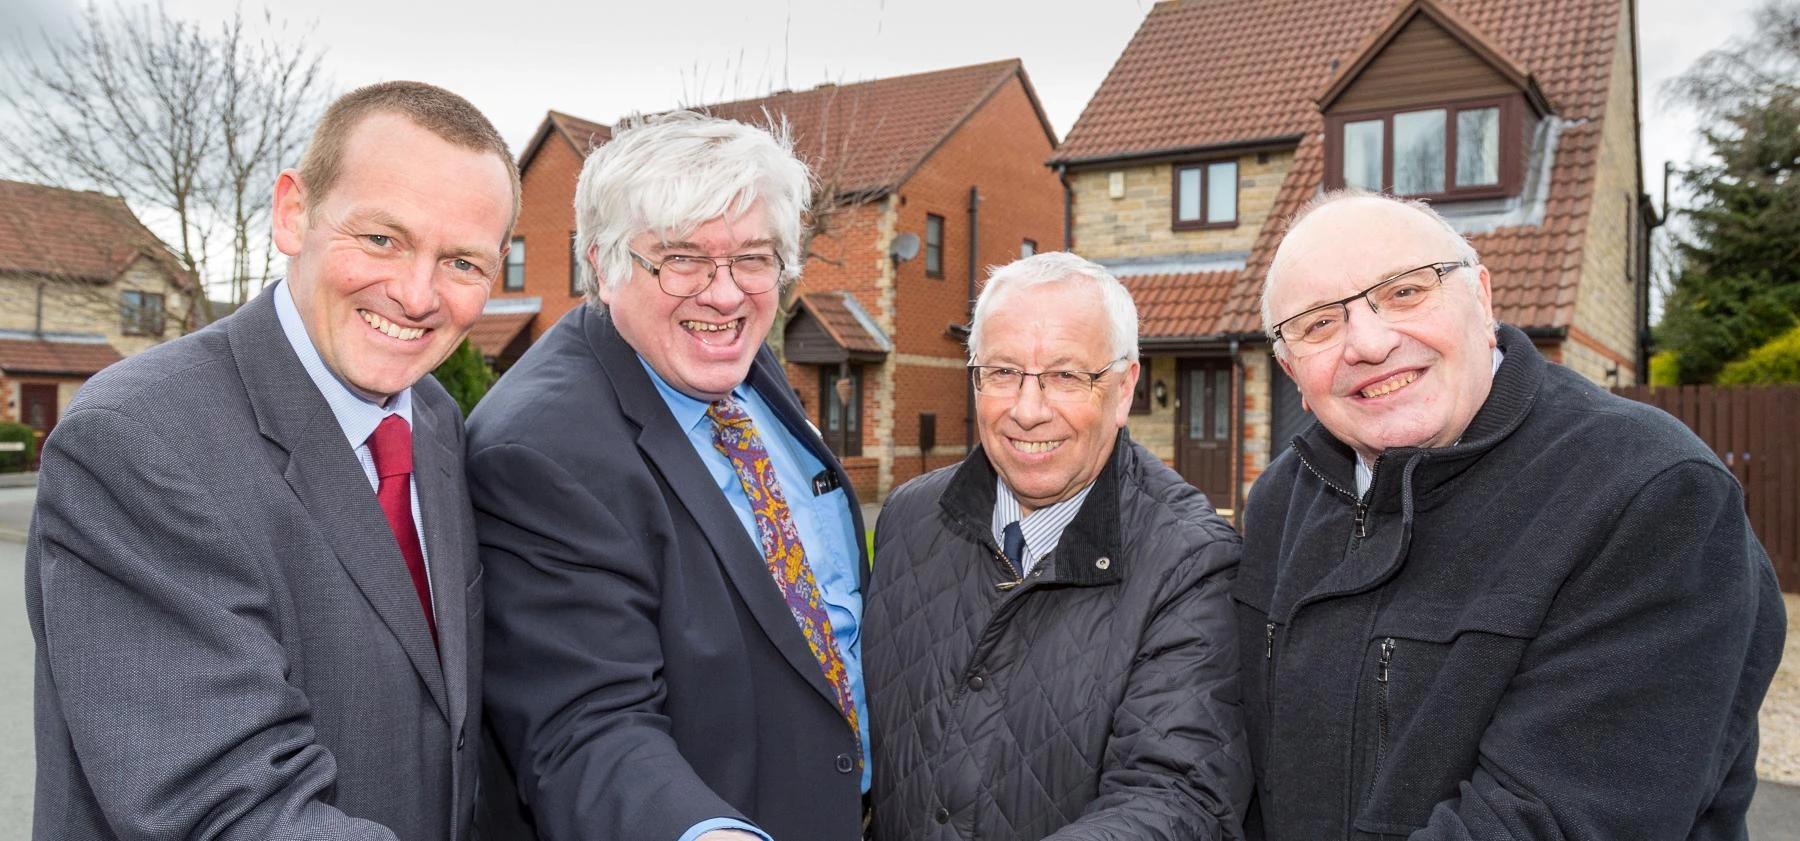 Richard Bass (left) Cllr. Alan Shield (second from right) and Cllr. David Bell (right), with Cllr. N